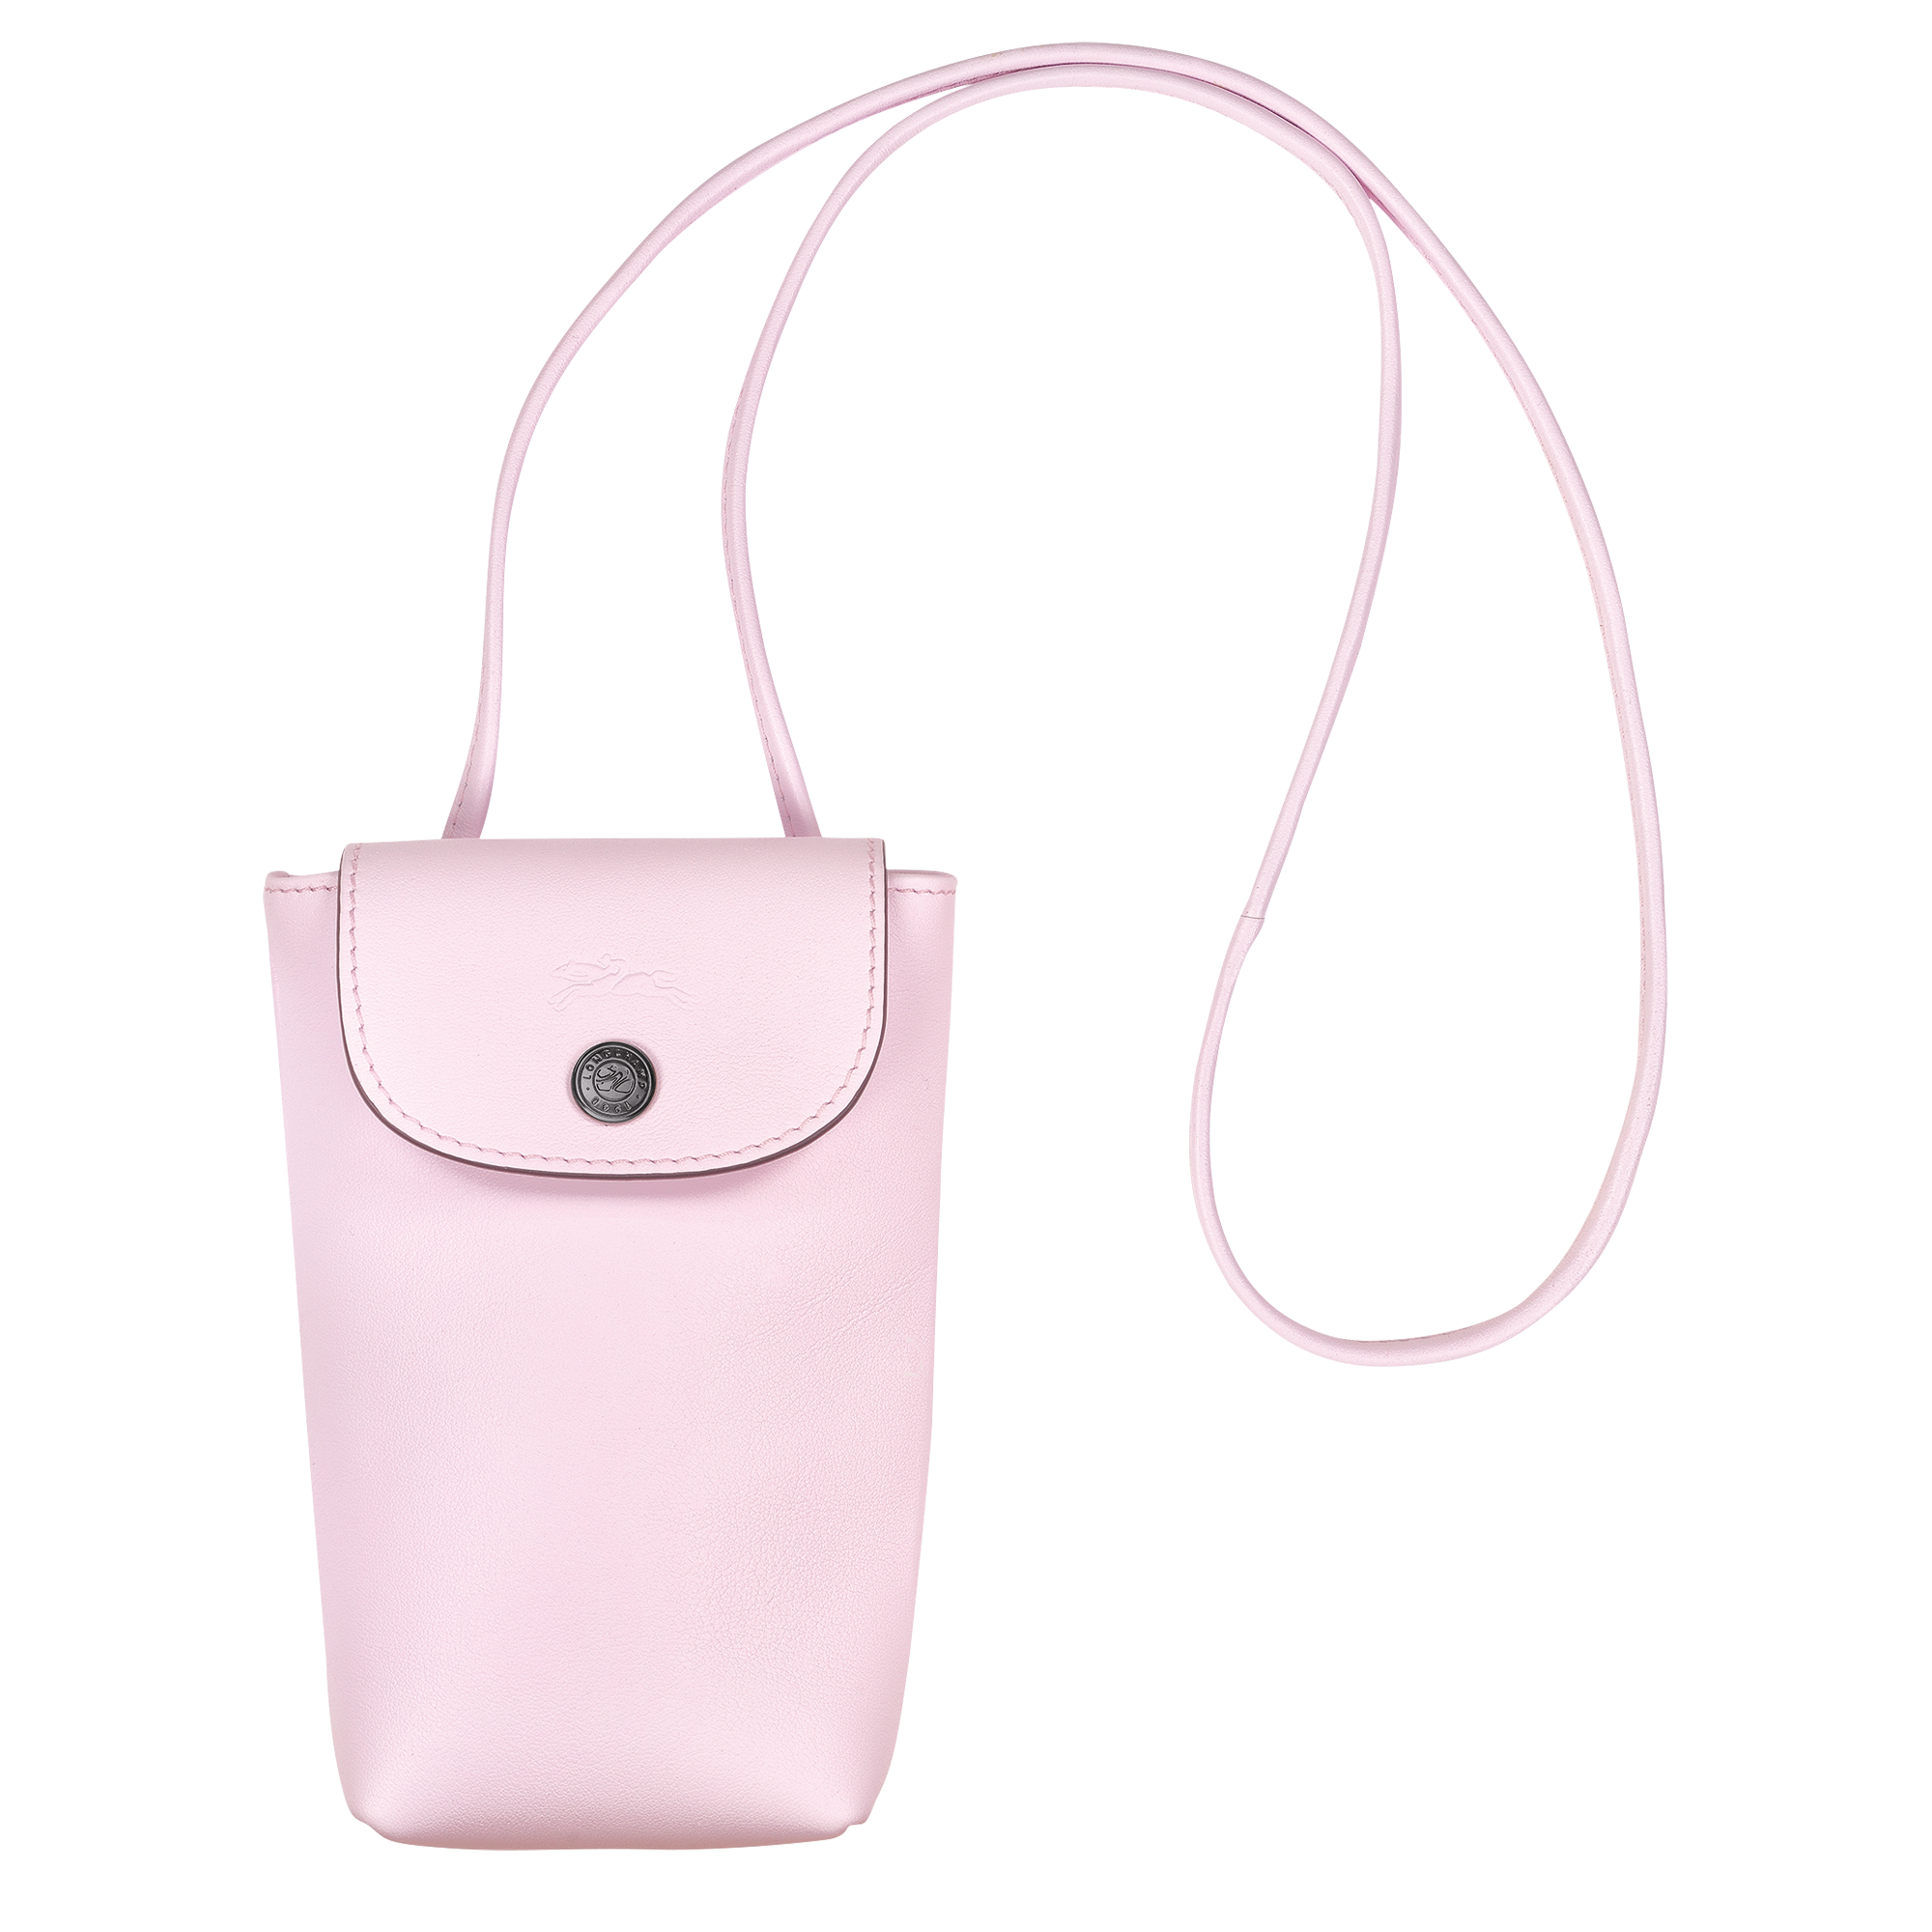 Le Pliage Green Pouch with handle Pink - Recycled canvas (34175919P75)